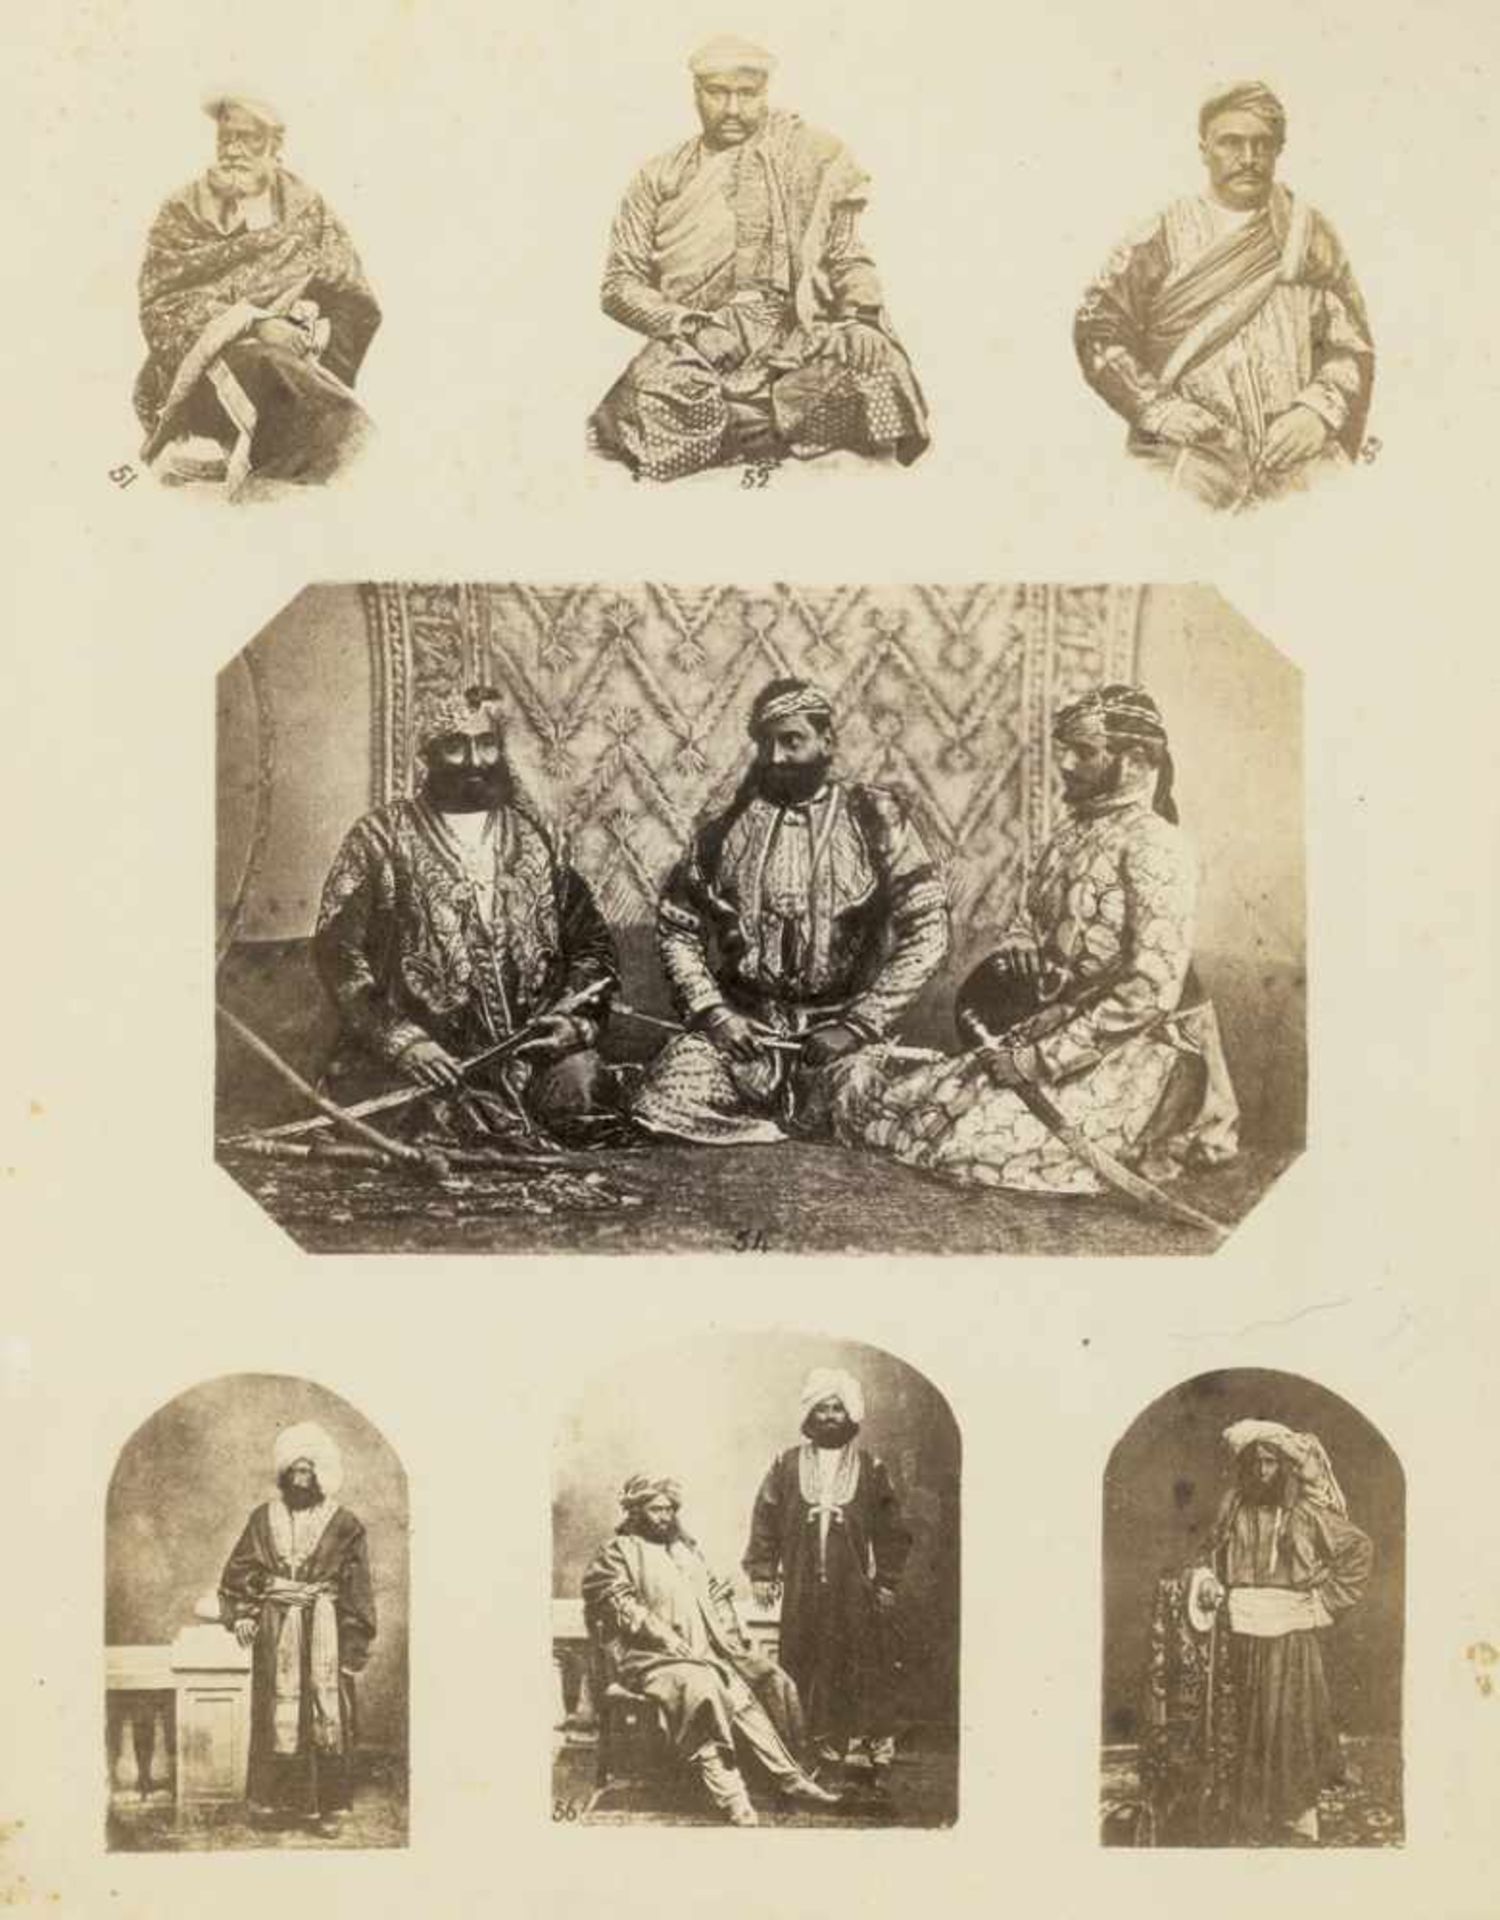 Watson, John Forbes: The Textile Manufactures and the Costumes of the People of India - Image 2 of 2